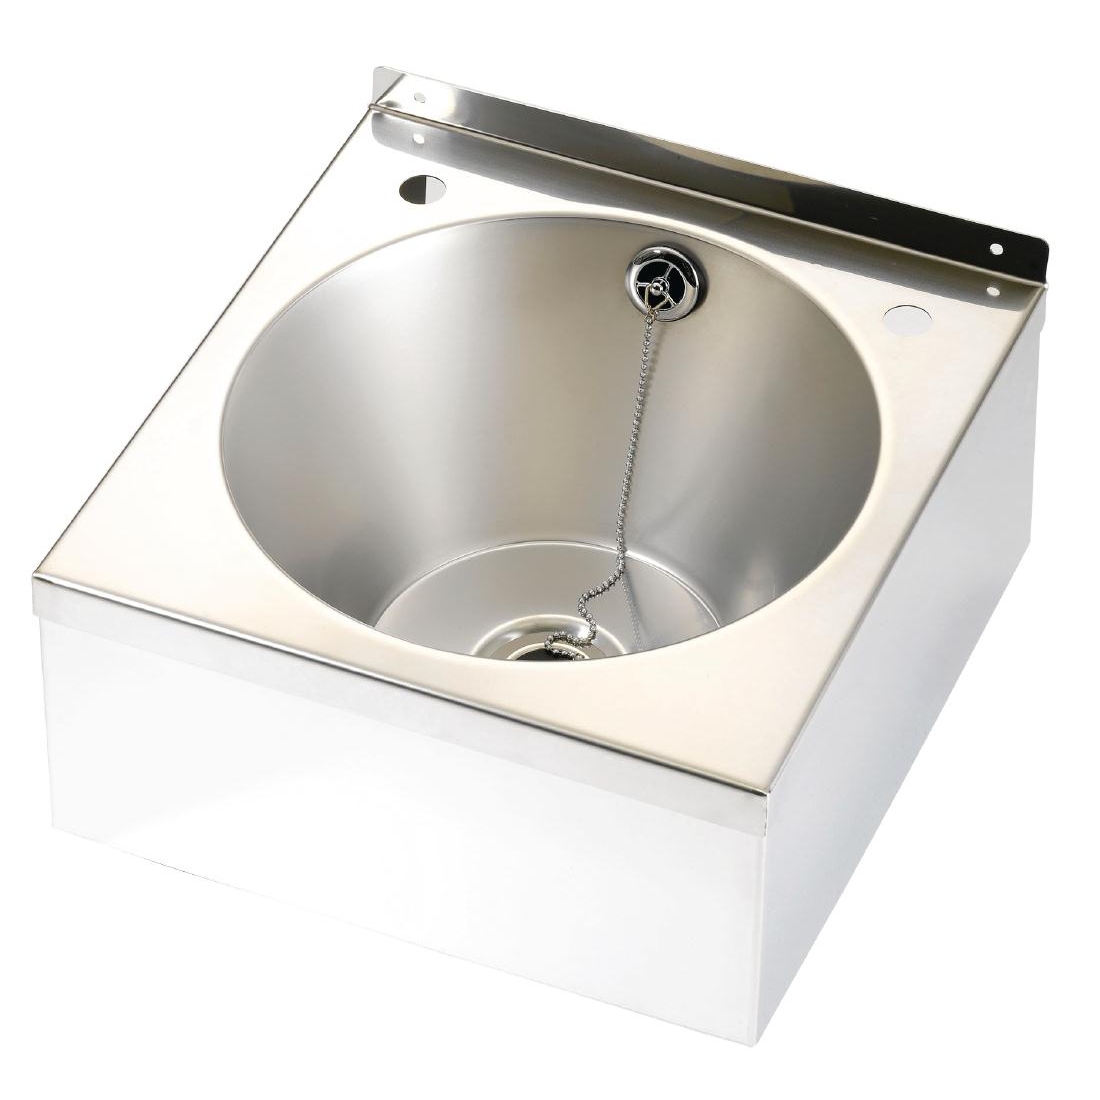 Franke Sissons Stainless Steel Wash Basin with Waste Kit 345x340x185mm